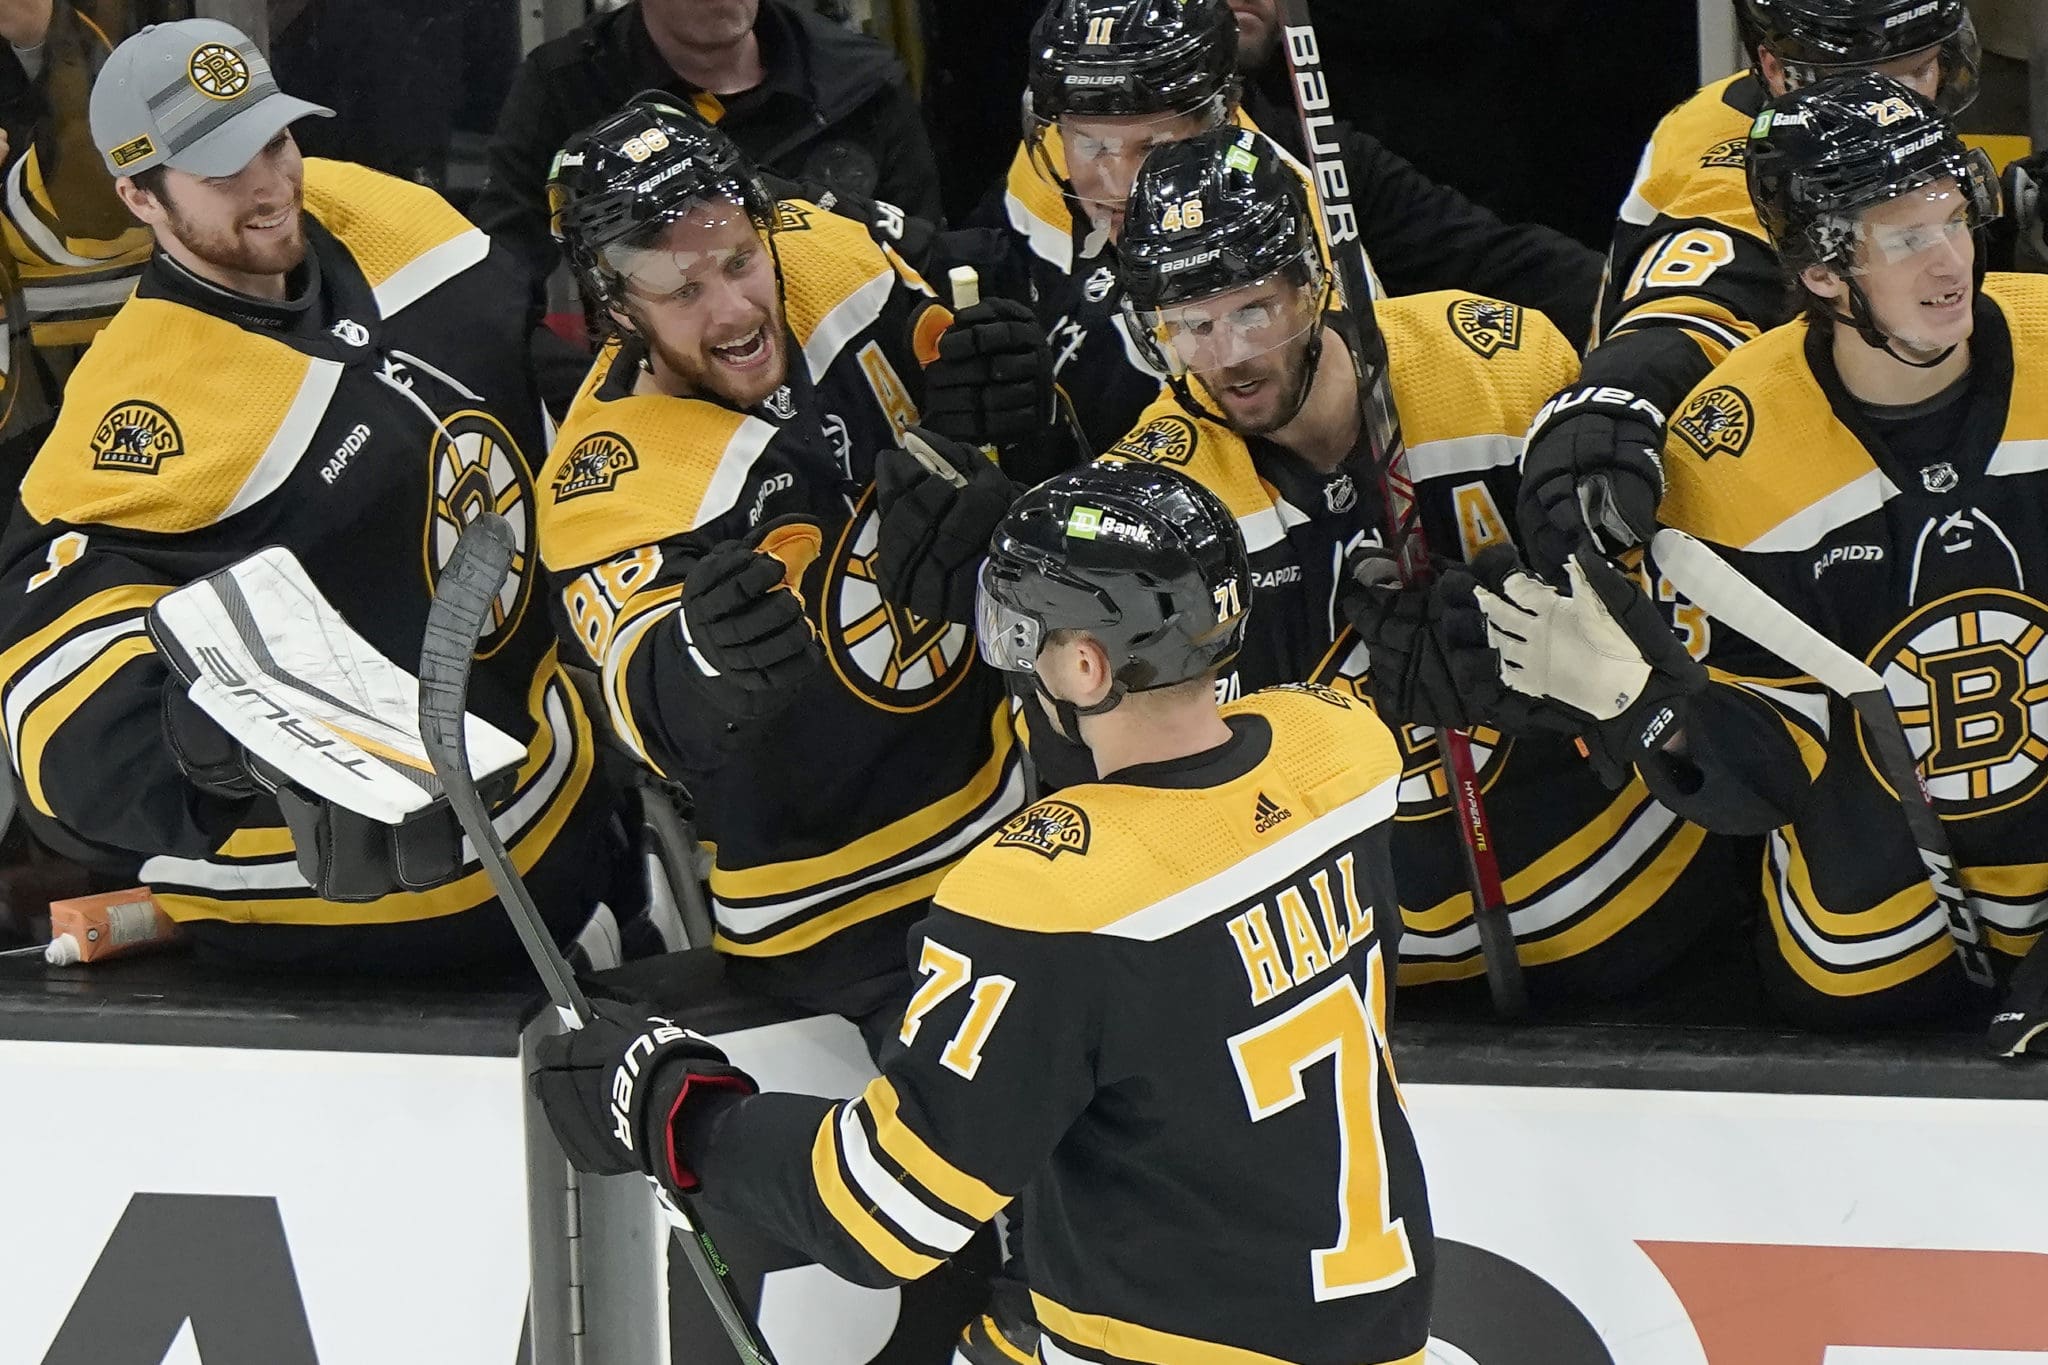 Boston Bruins Off On Right Foot With Hall Move